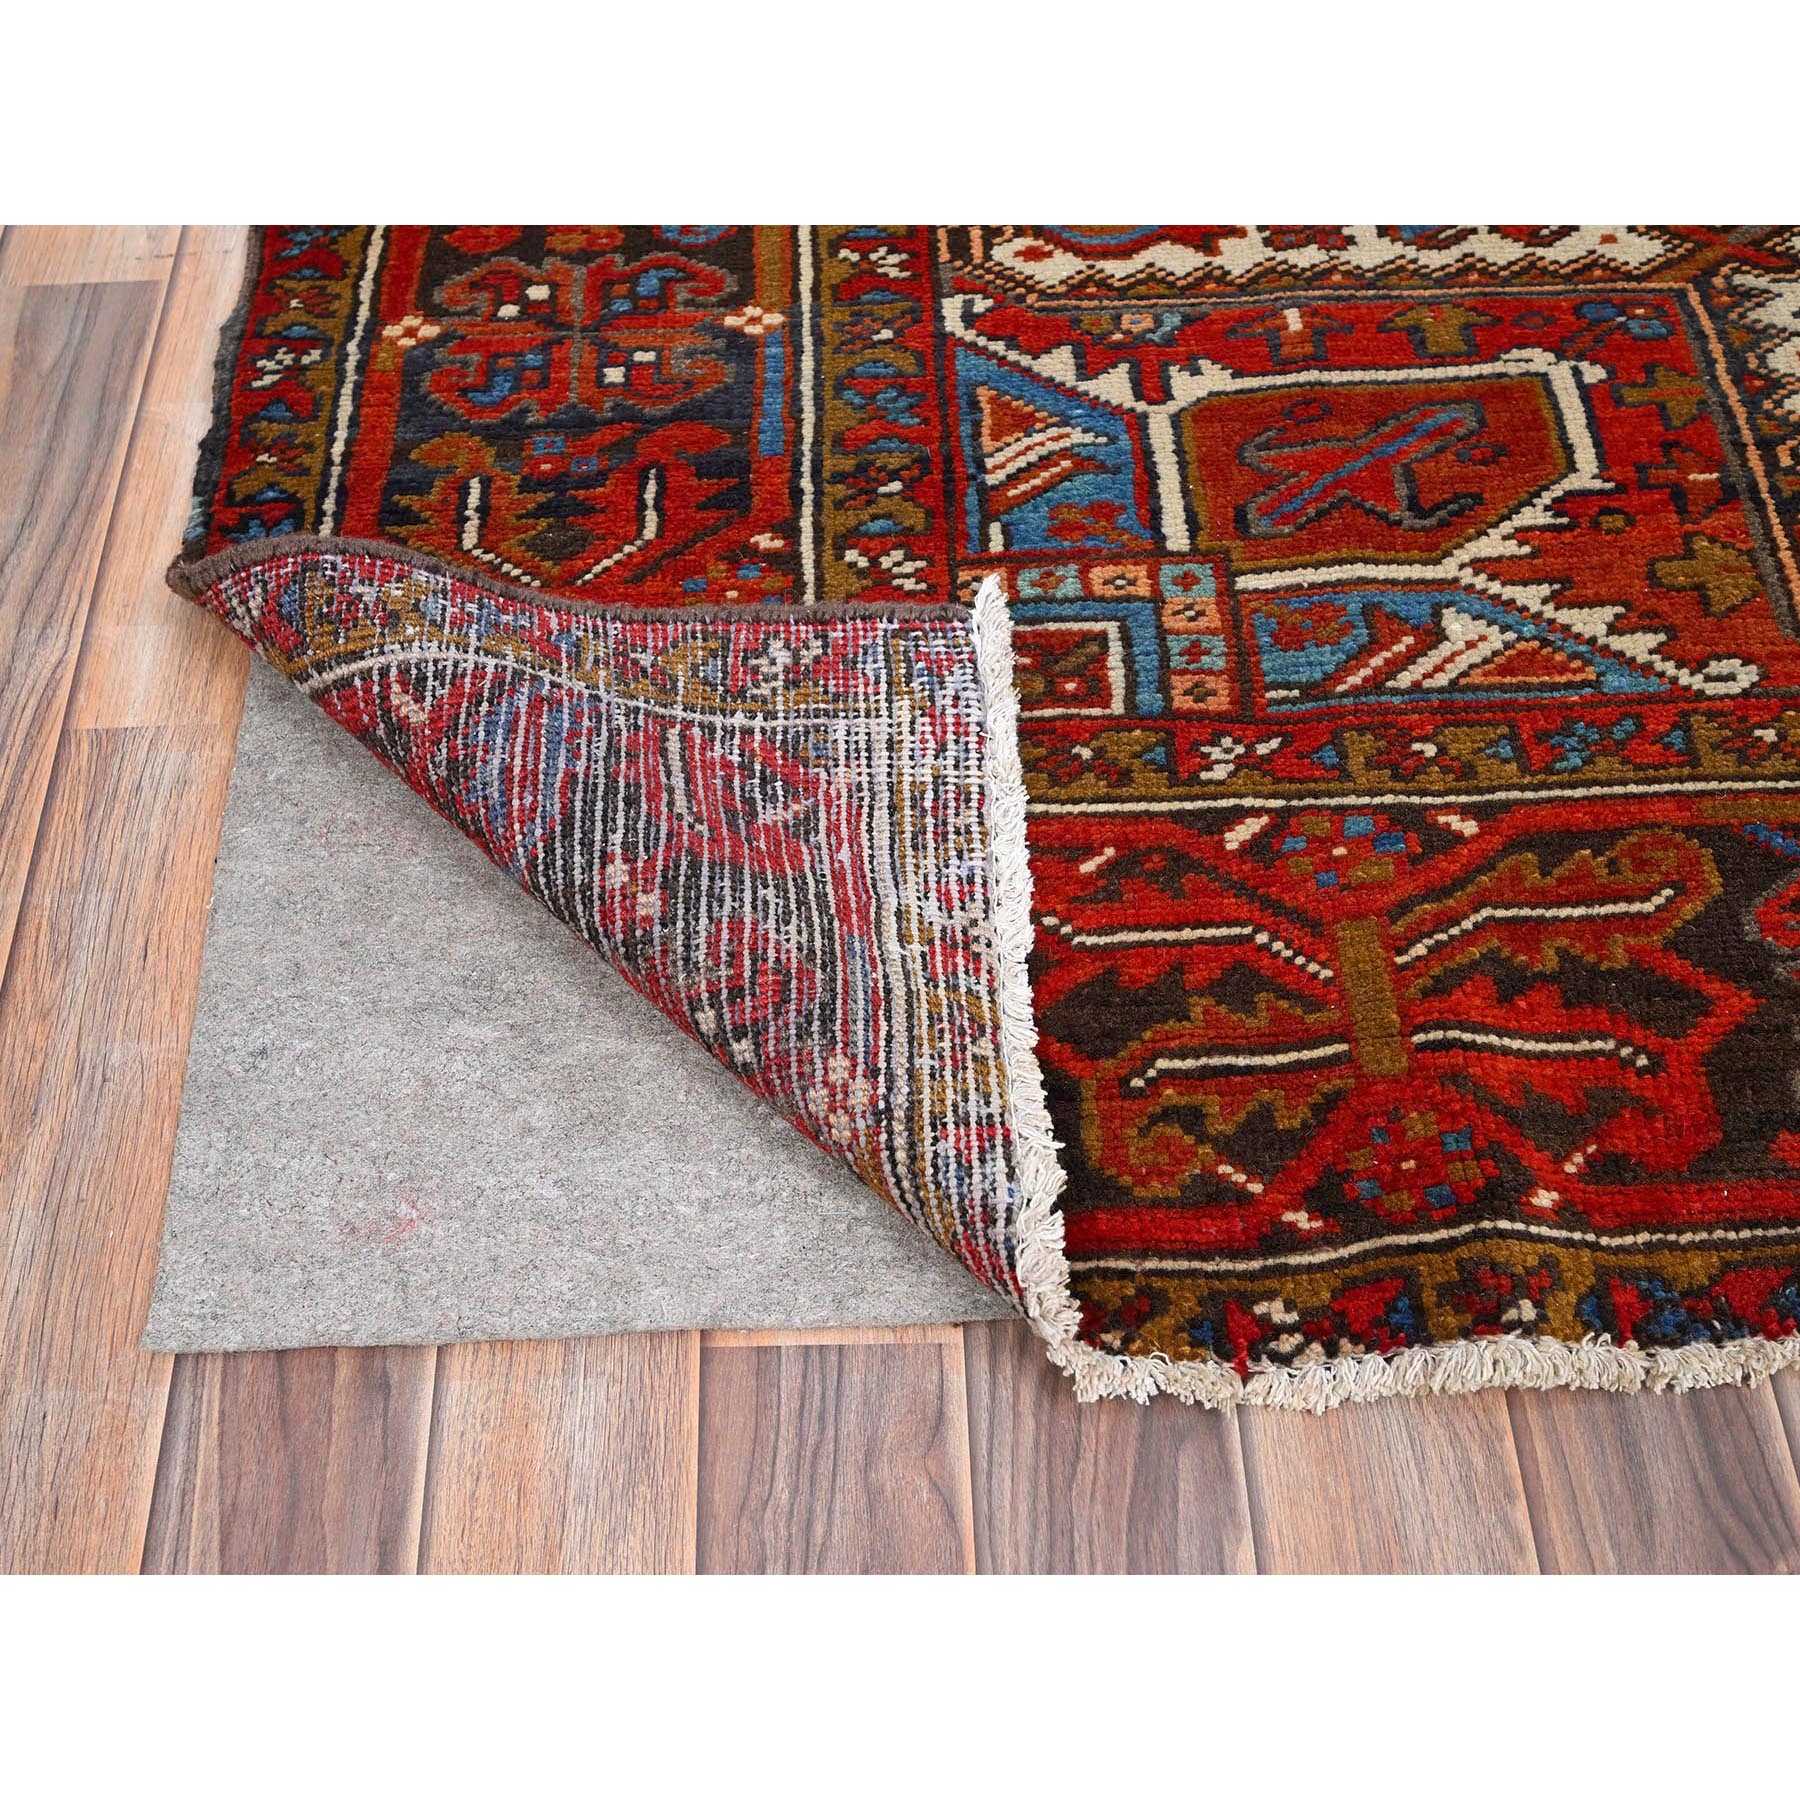 7'7"x10'5" Crimson Red, Evenly Worn, Pure Wool, Hand Woven, Semi Antique Persian Heriz, Good Condition, Distressed Feel, Oriental Rug 